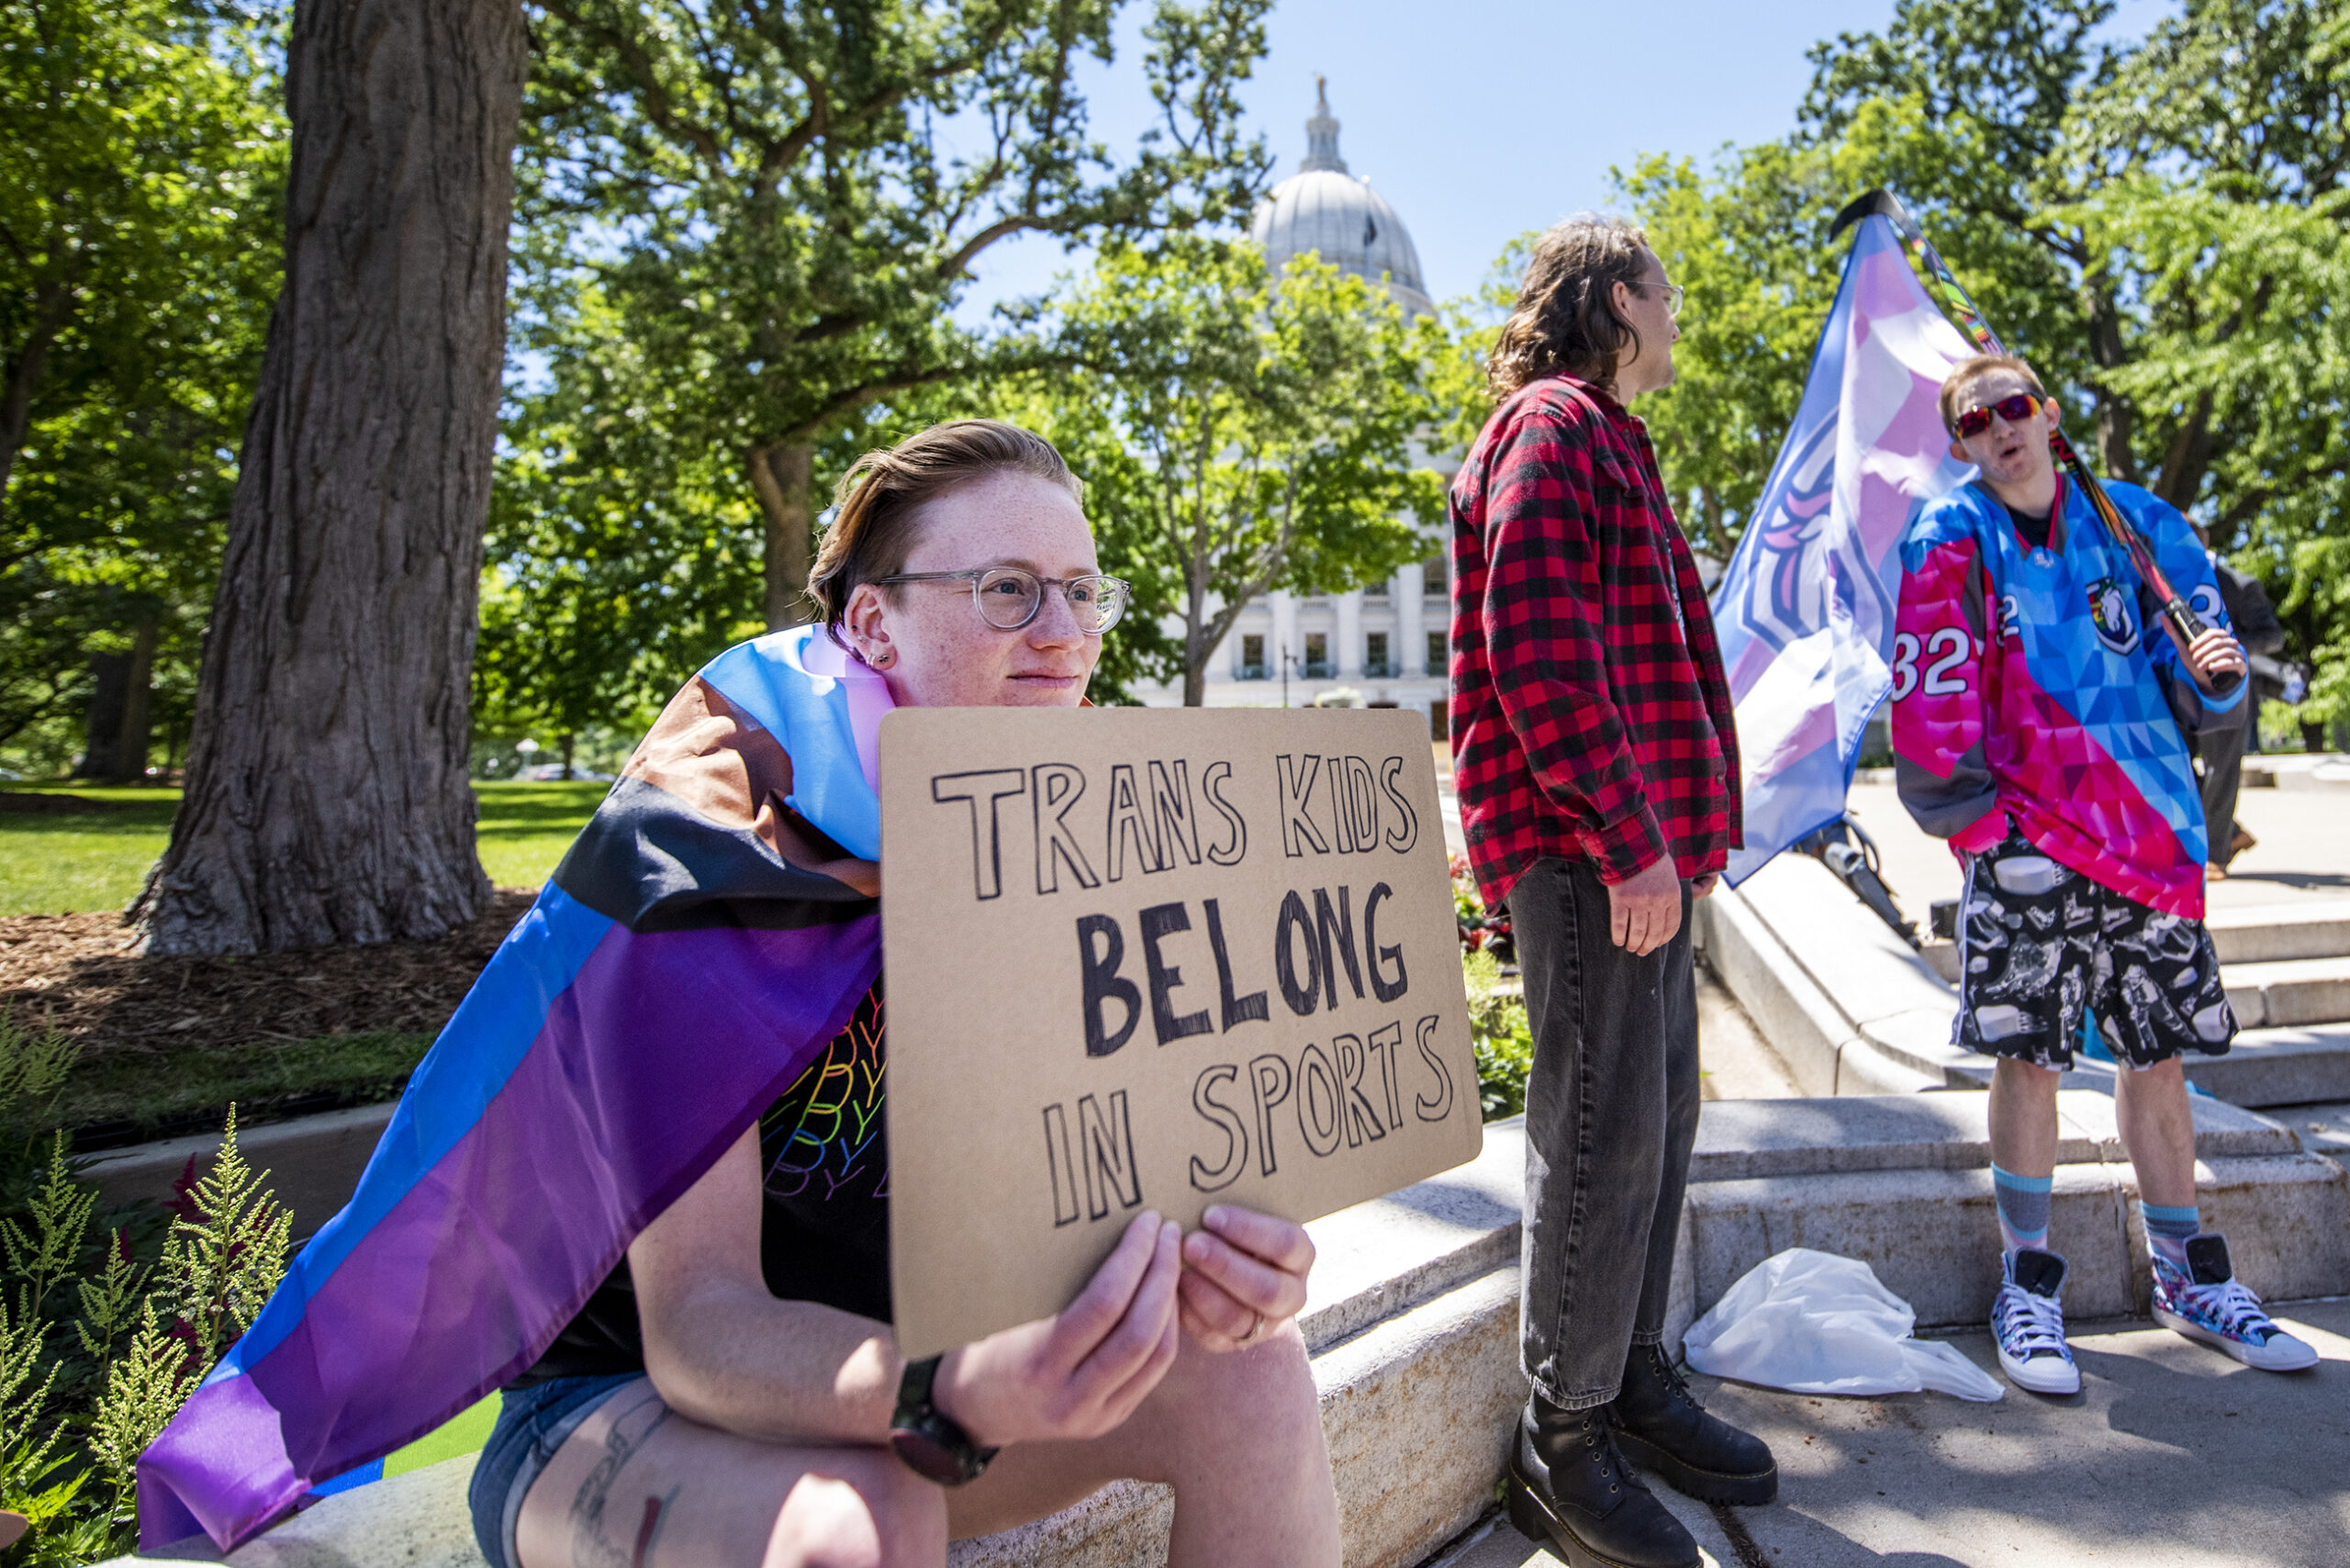 A protester holds a sign that says "Trans Kids Belong In Sports."